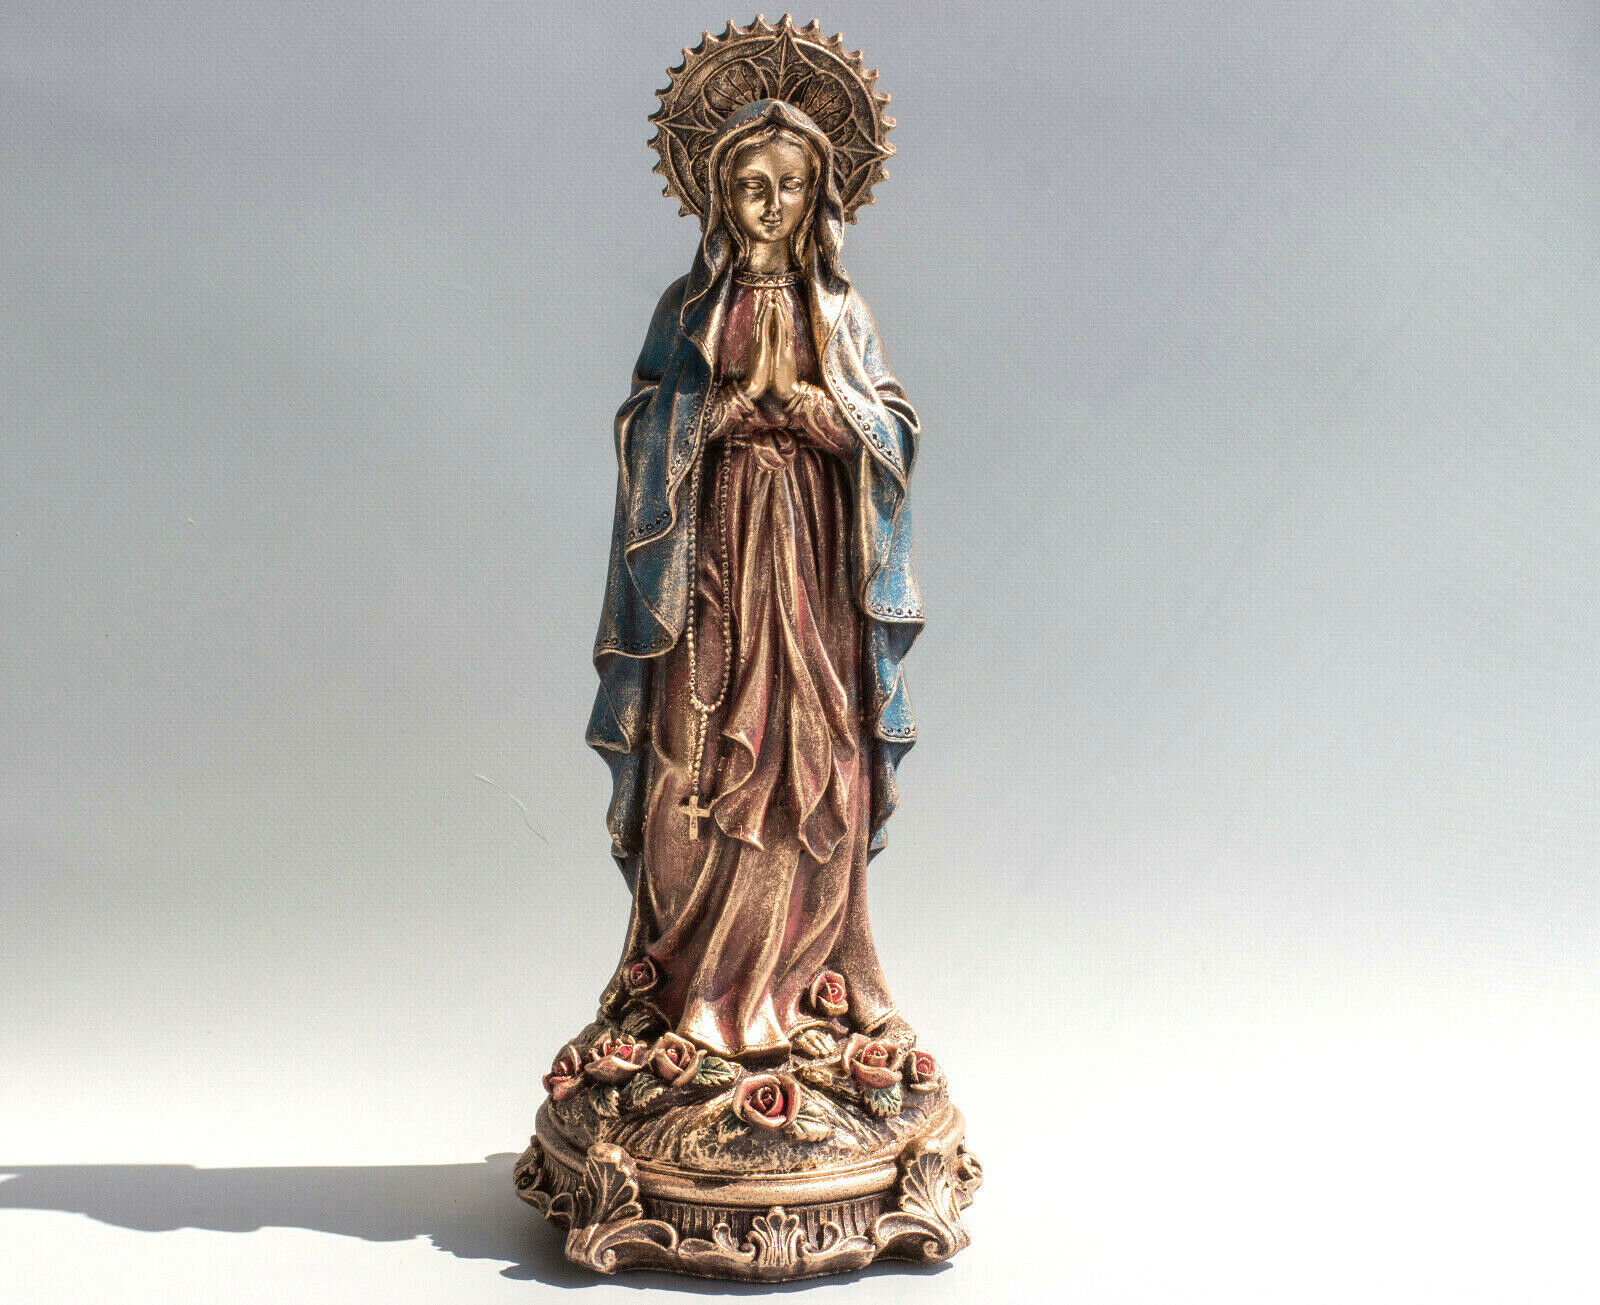 Our Lady Statue Religious Virgin Mary Madonna Figurine Holy Mother God Sculpture